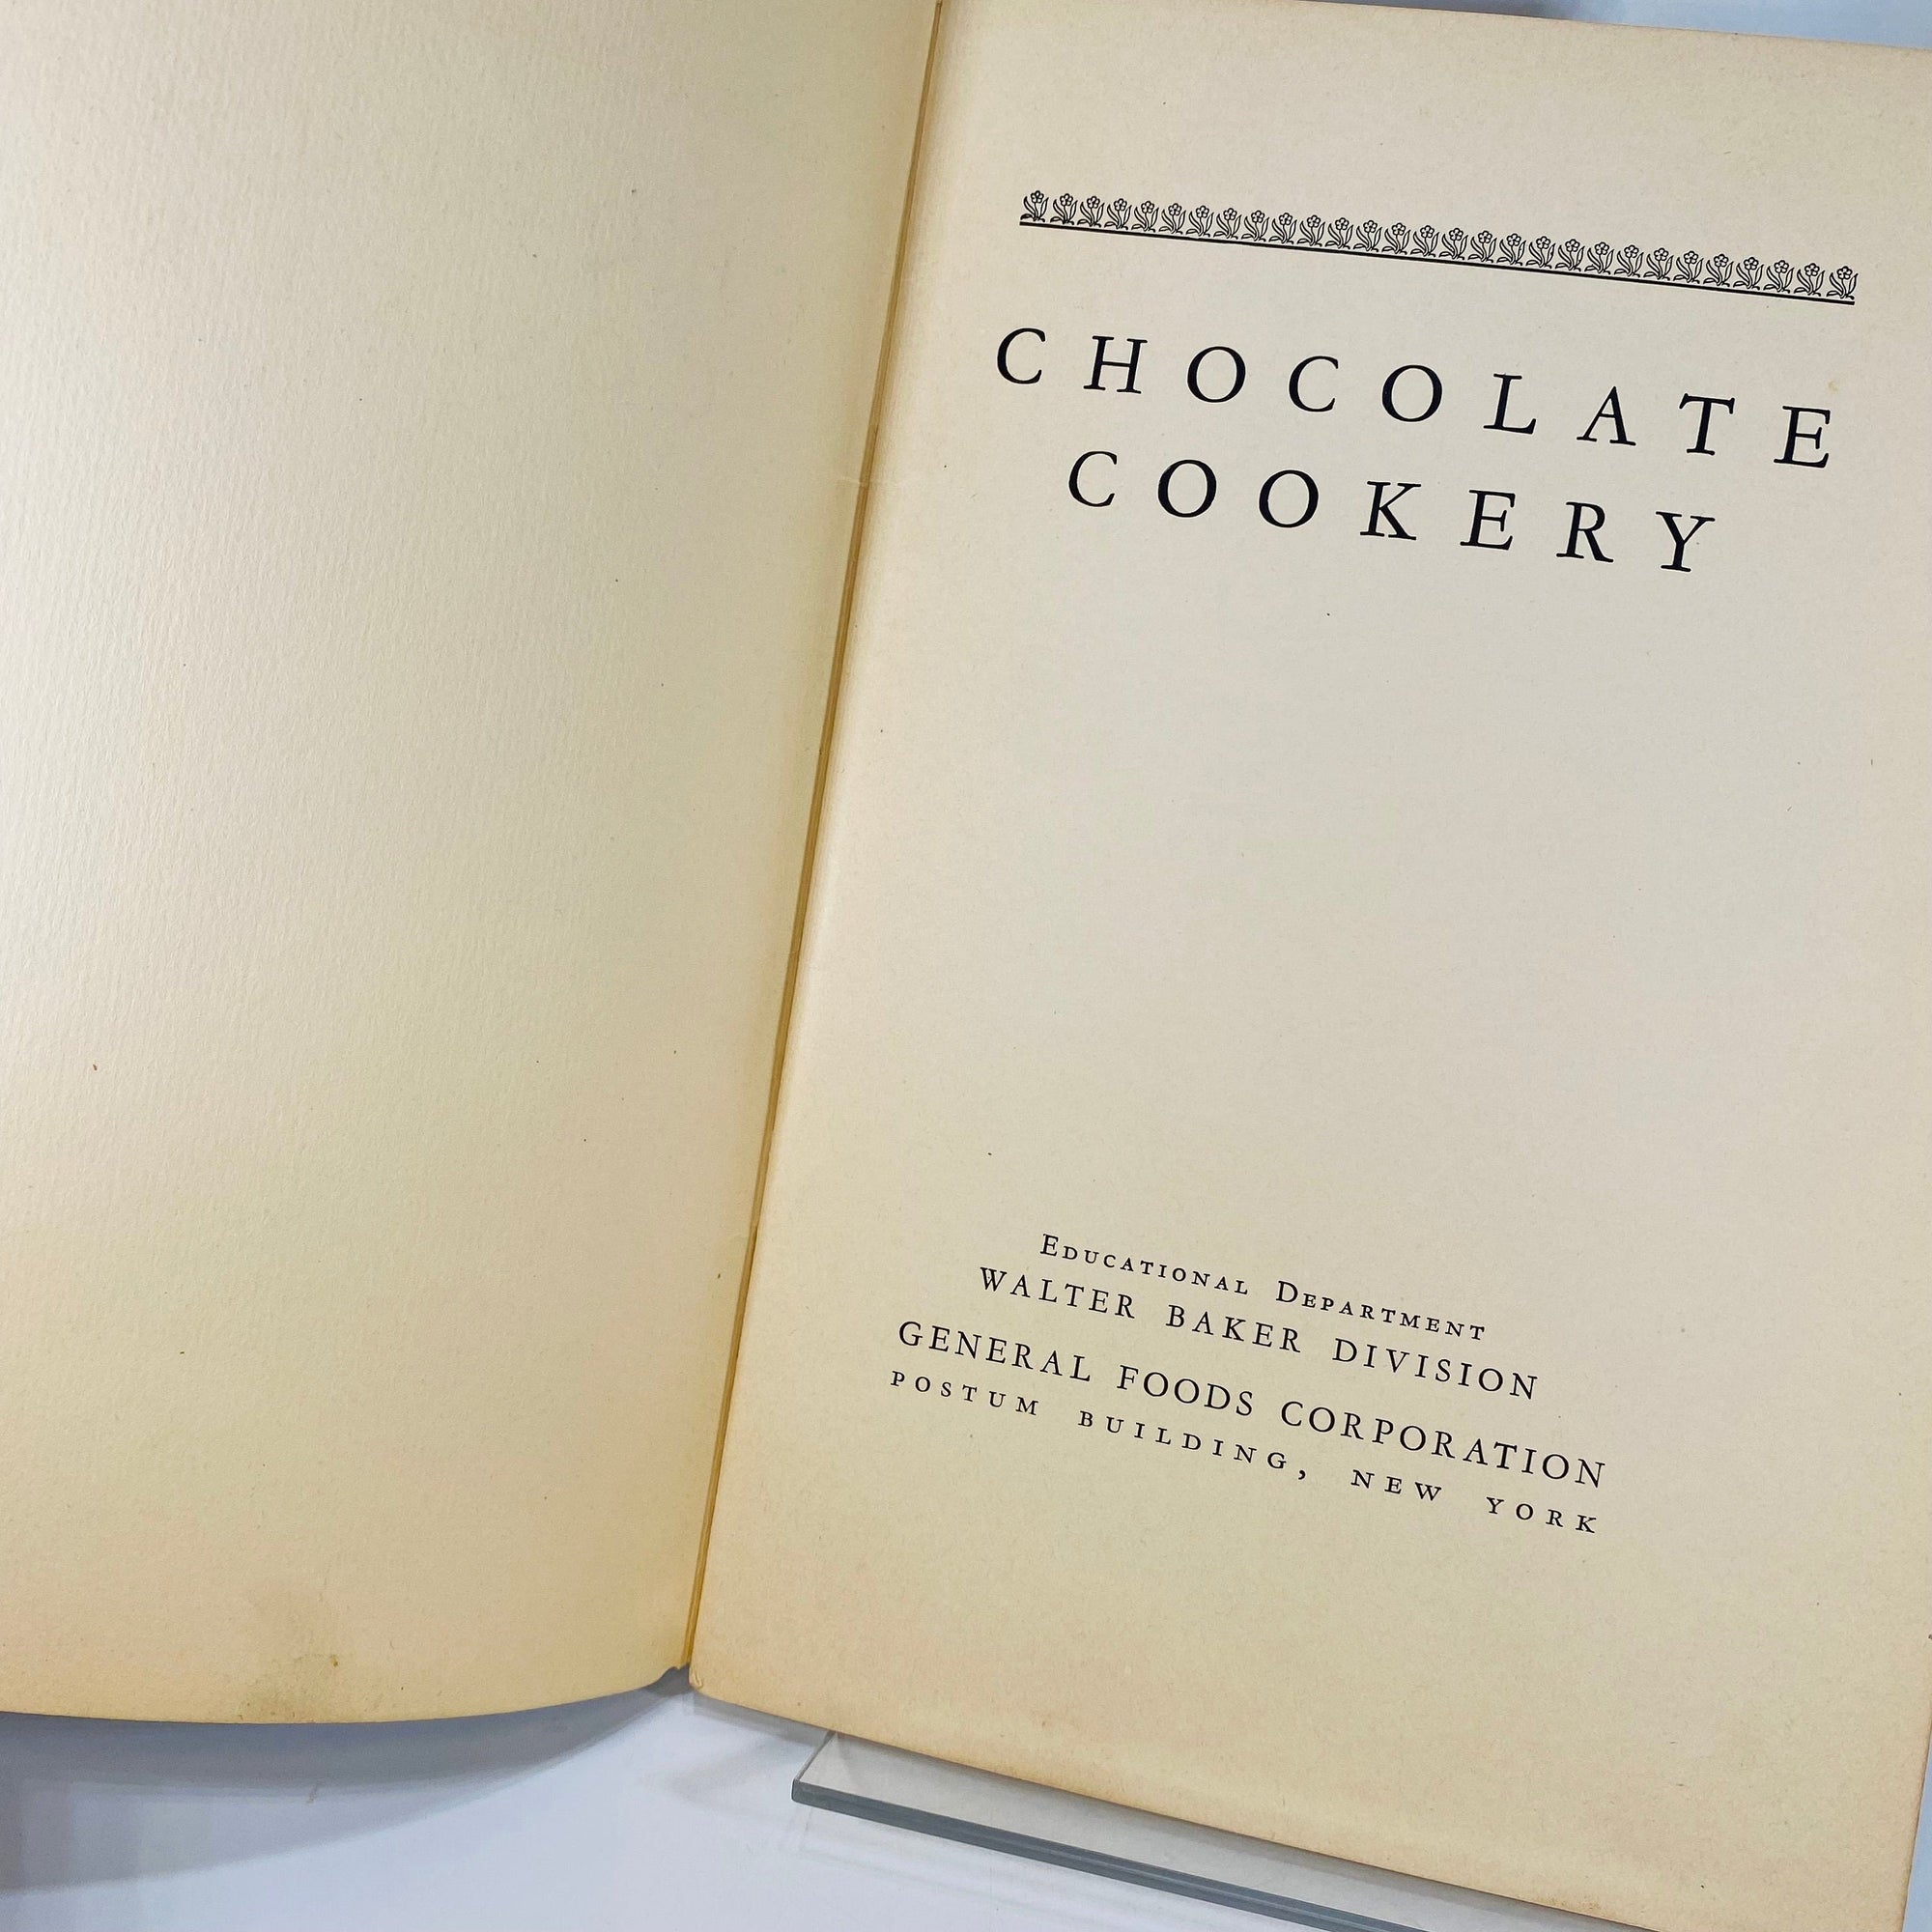 Chocolate Cookery Vintage Recipe Pamphlet by Educational Dept. of Walter Baker Division 1929 General Foods Corp Vintage Book